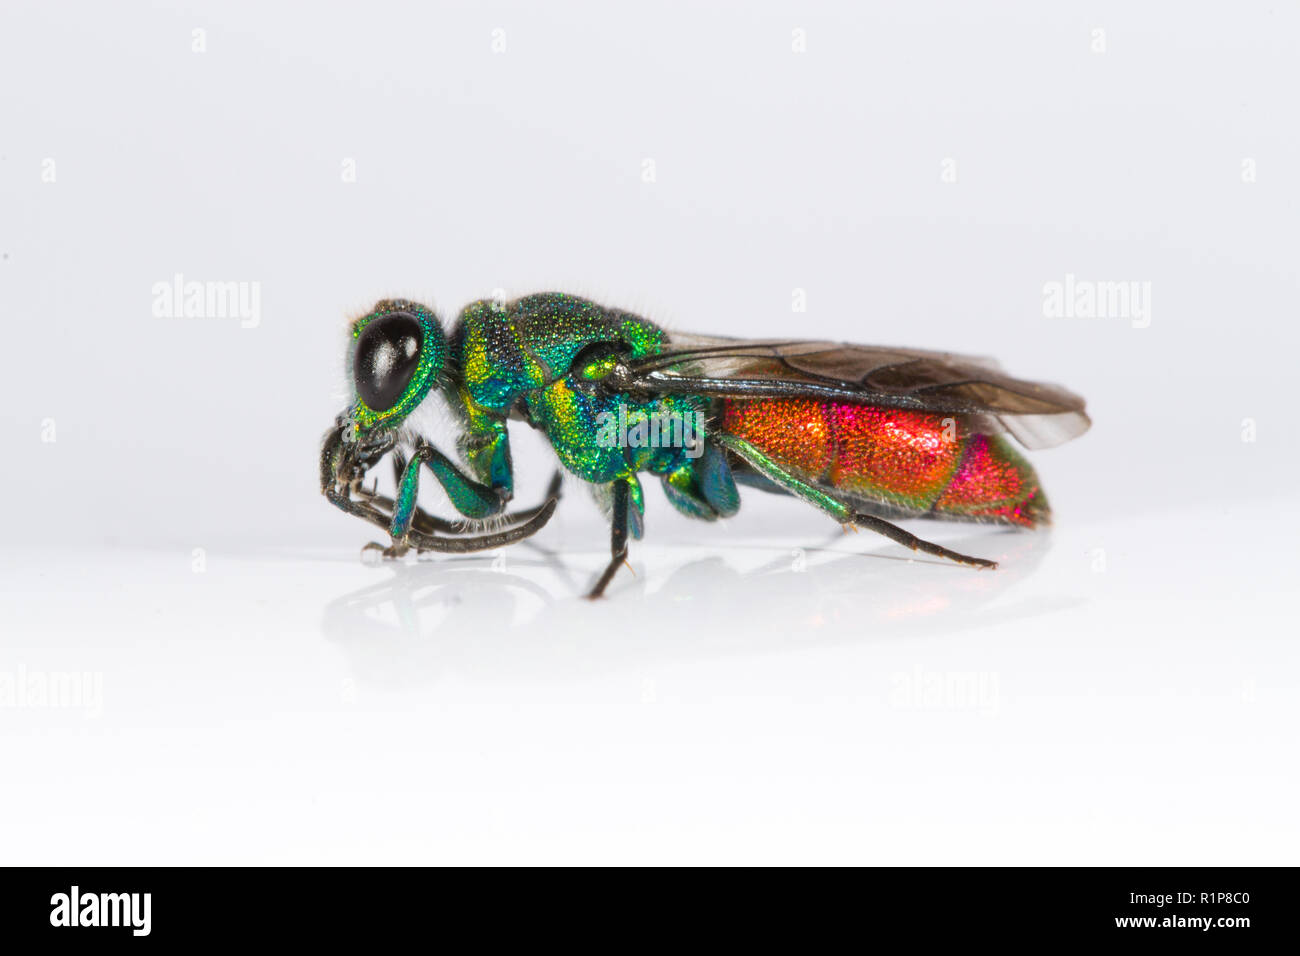 Ruby-tailed wasp (Chrysis sp.) adult female. Live insect photographed on a white background. Powys, Wales. June. Stock Photo